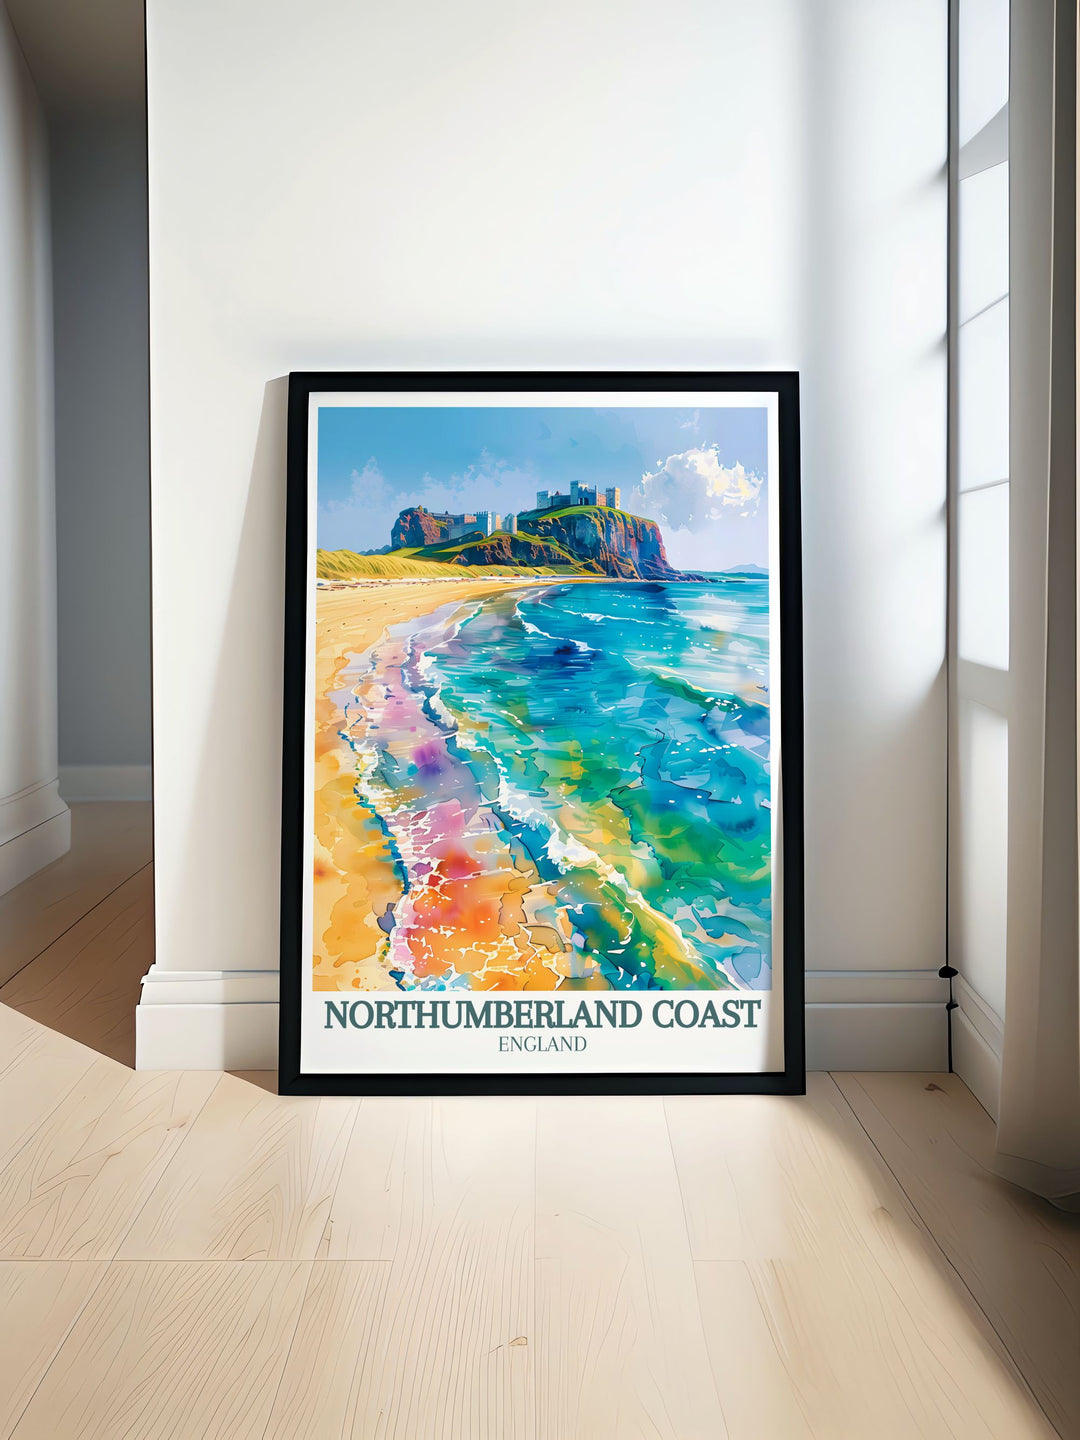 Beautiful Northumberland Print featuring the iconic Bamburgh Castle and Dunstanburgh Castle along the stunning Northumberland Coast perfect for home decor and art enthusiasts who appreciate historical landmarks and natural beauty